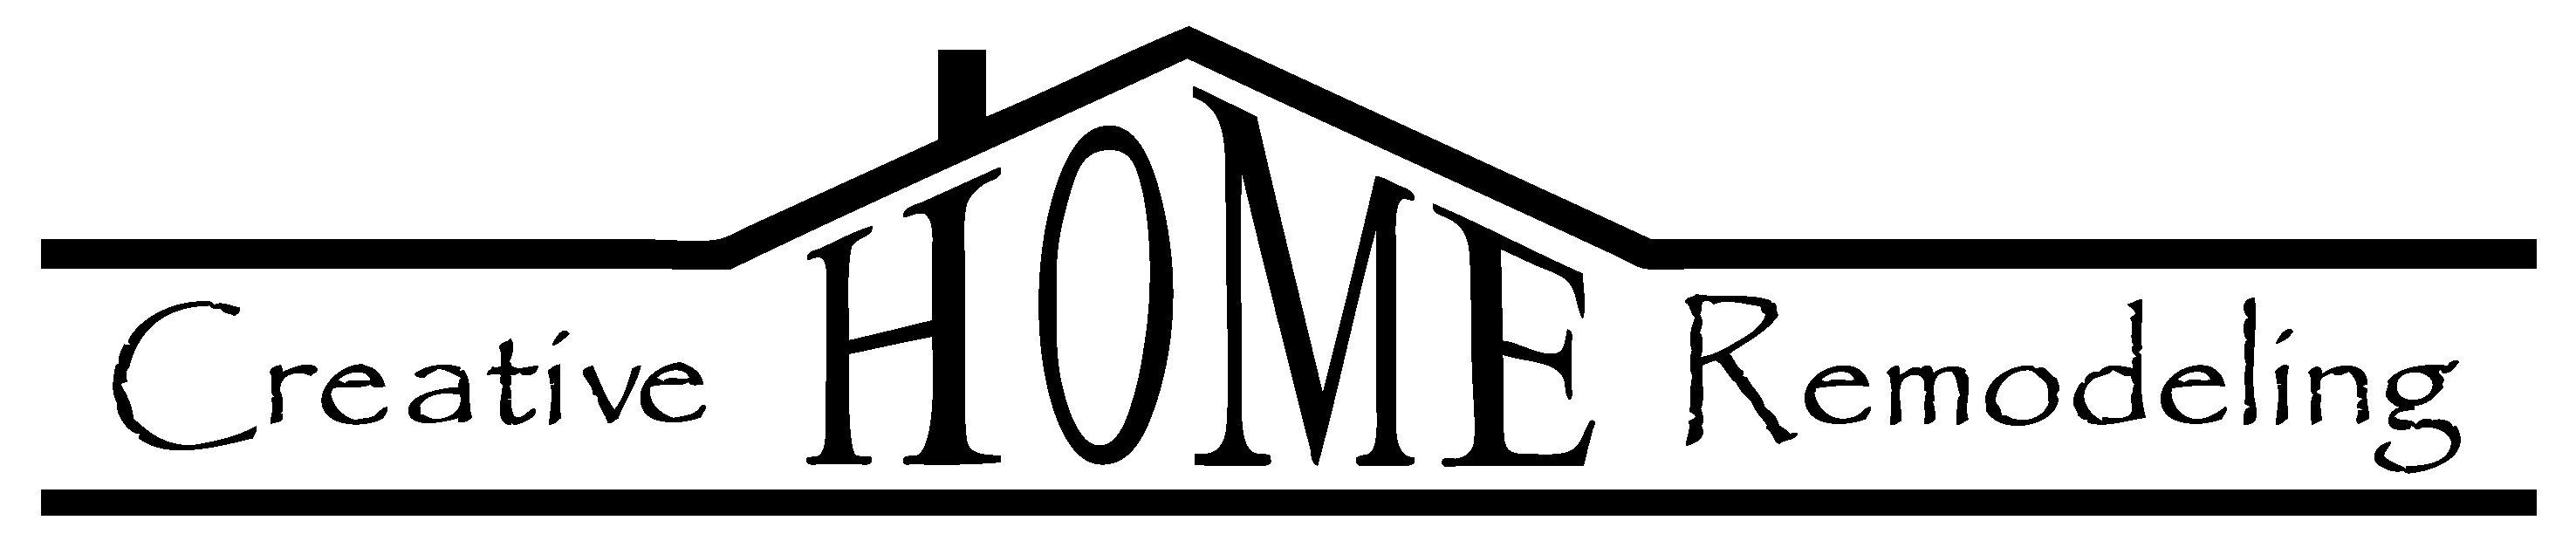 house remodel clipart - photo #21